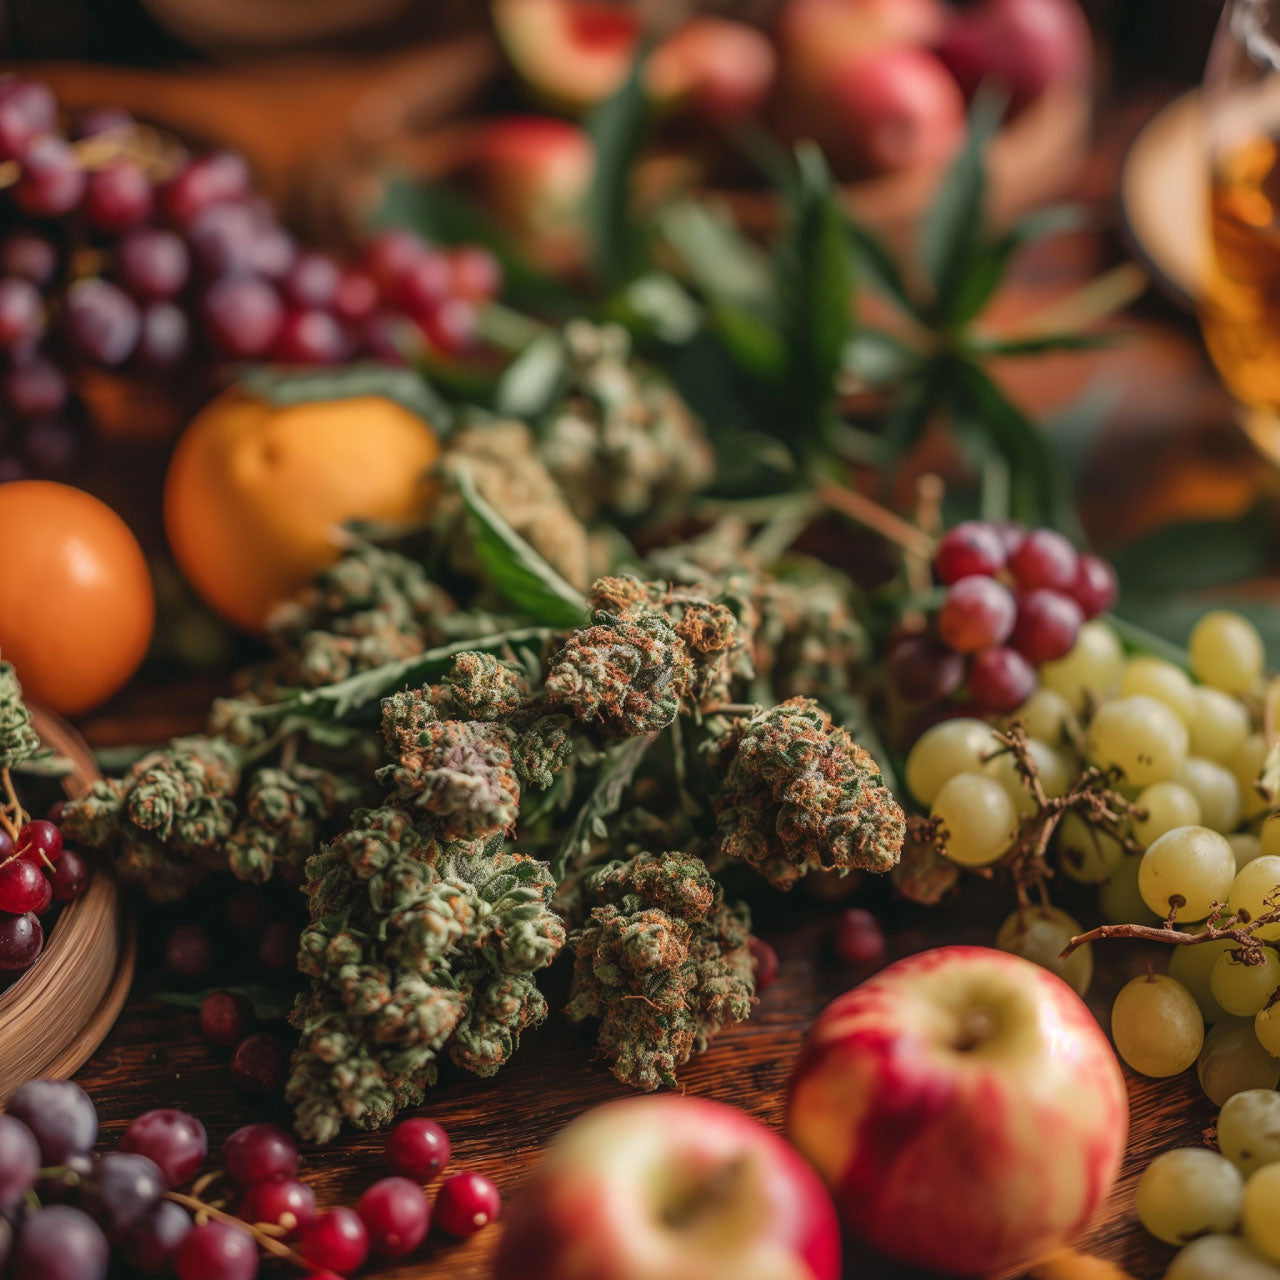 Image of cannabis flower and assorted fruits on a table.